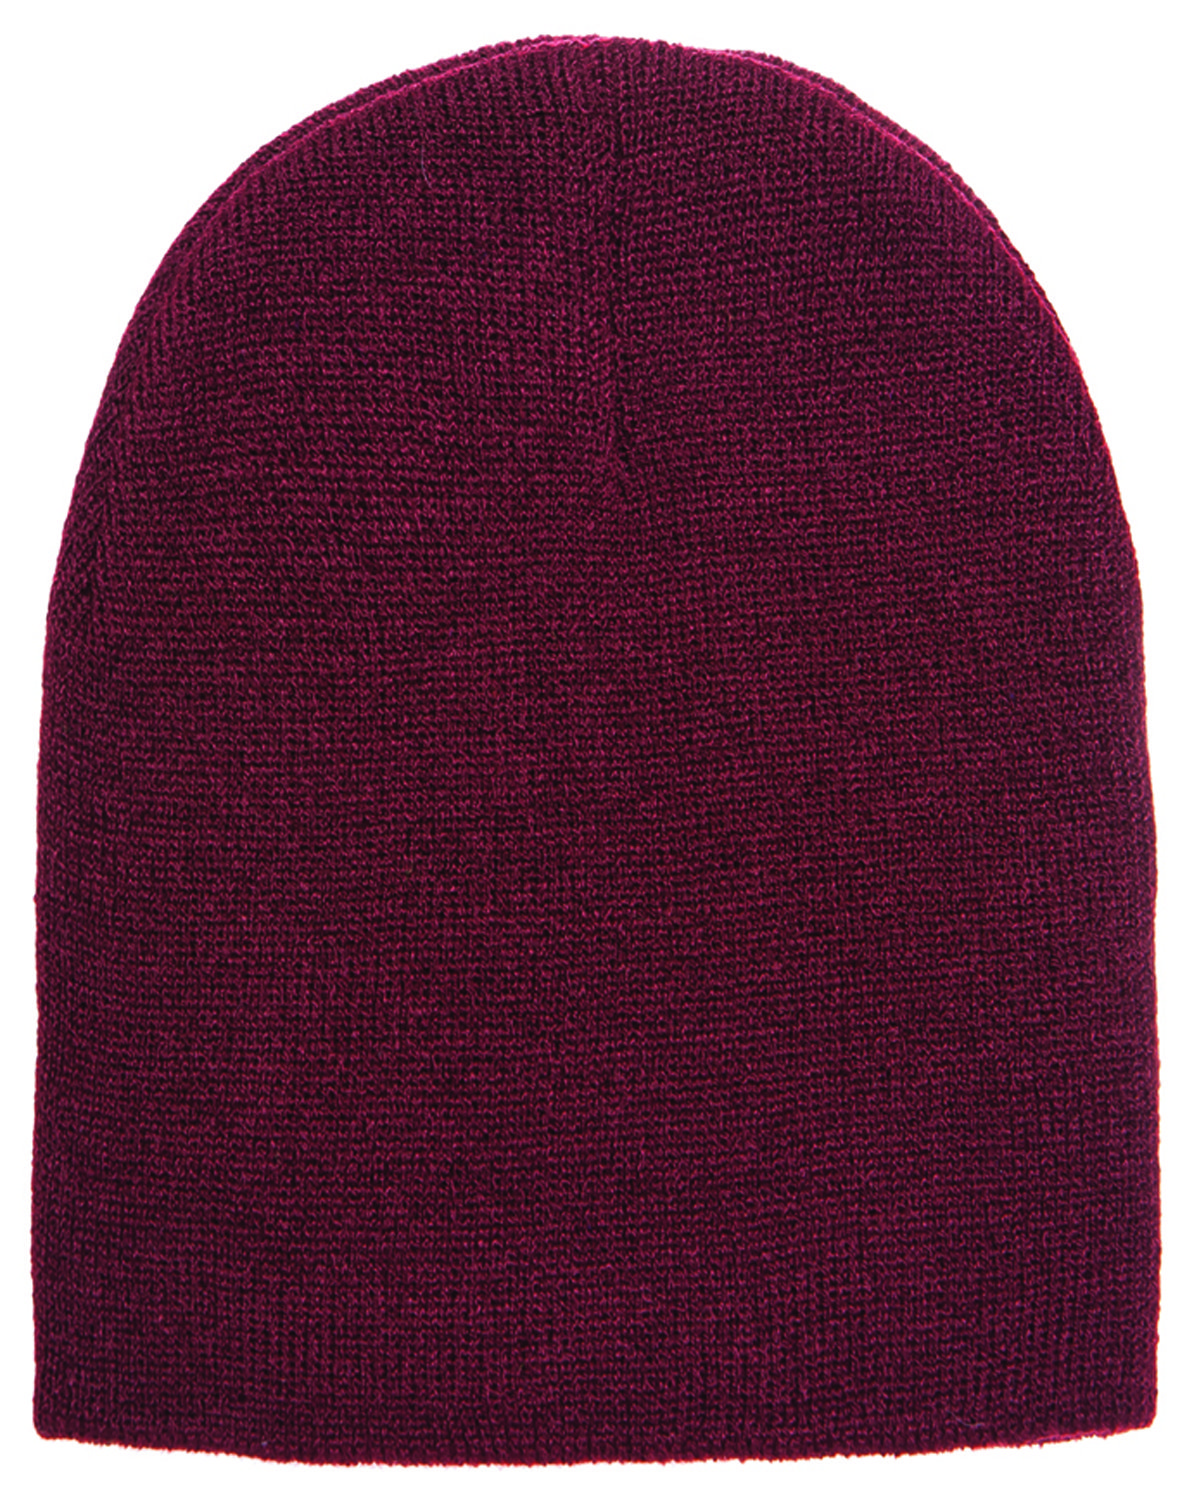 Yupoong Adult Knit Beanie | alphabroder